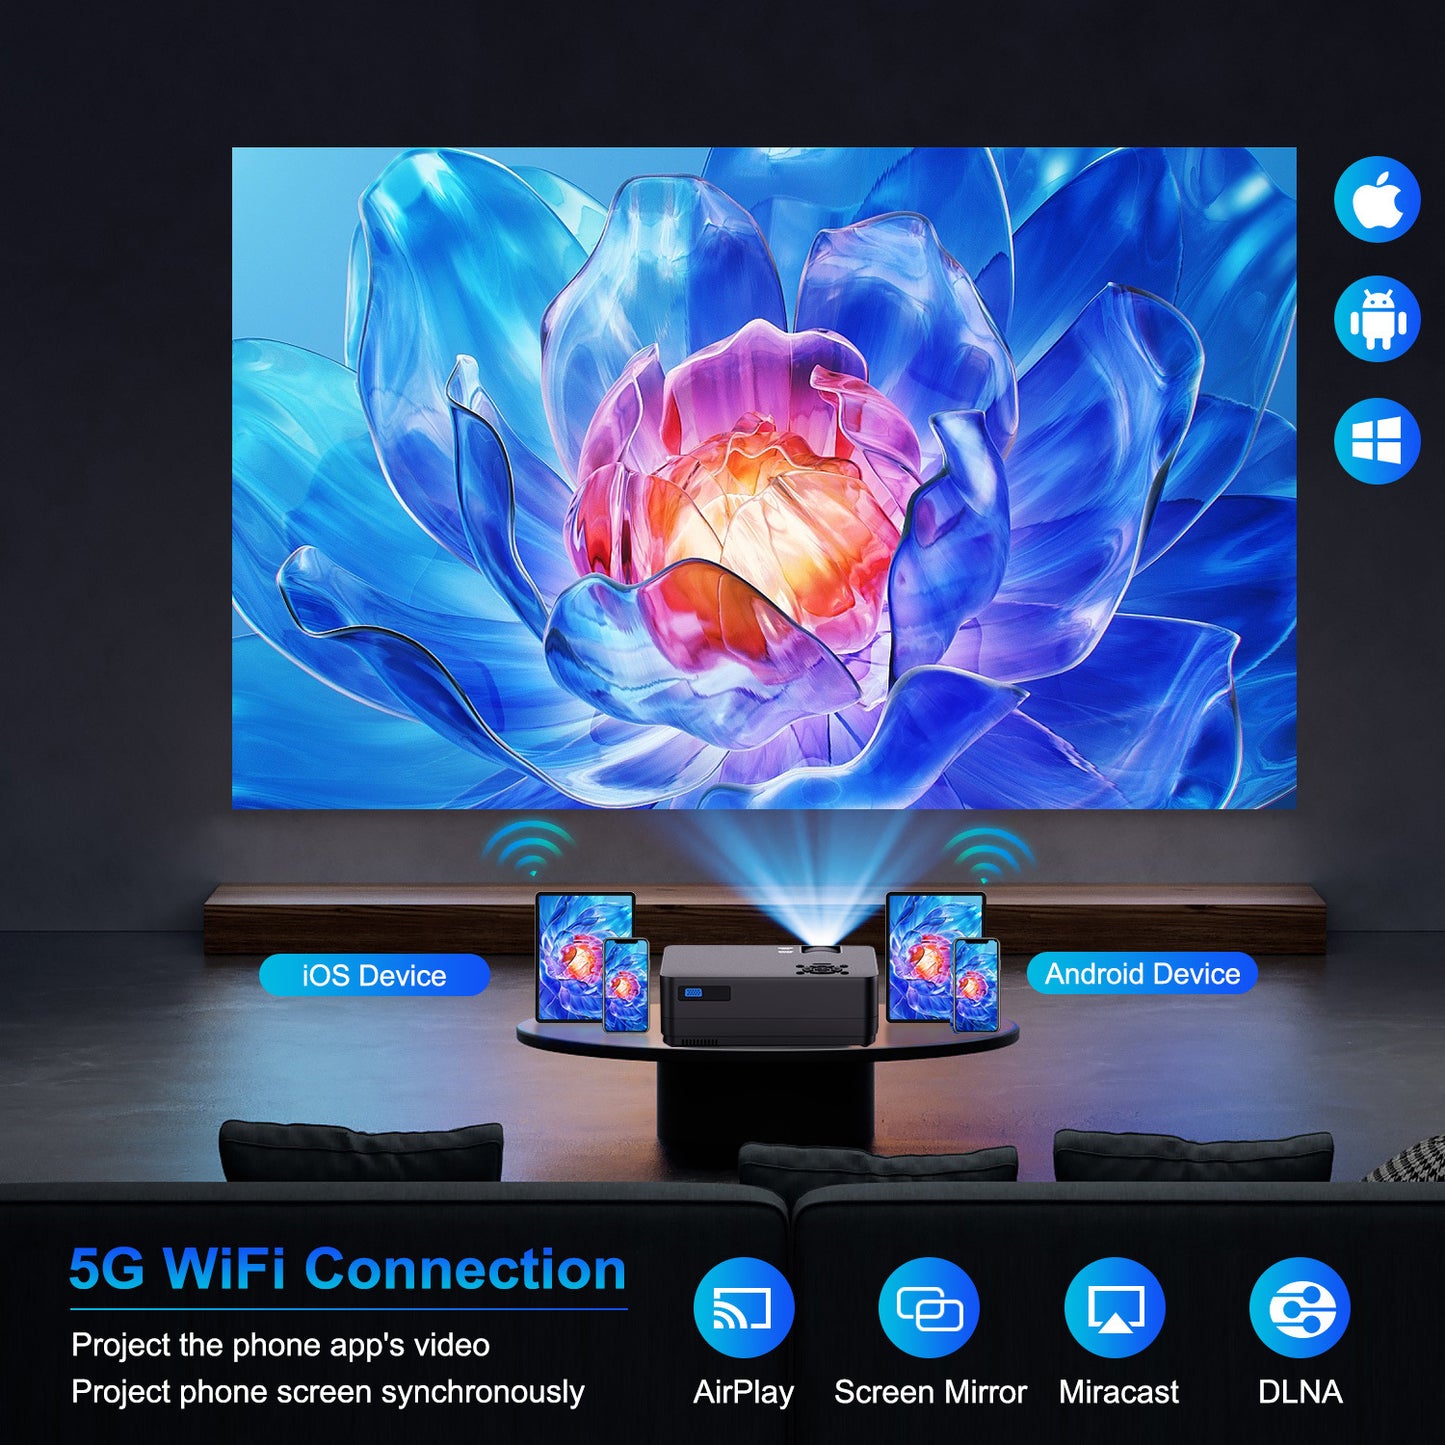 5G WiFi Bluetooth Native 1080P Projector[Projector Screen and Bag Included], 15000LM Full HD Movie Projector, 300" Display Support 4k Home Theater,Compatible with iOS/Android/XBox/PS4/TV Stick/HDMI